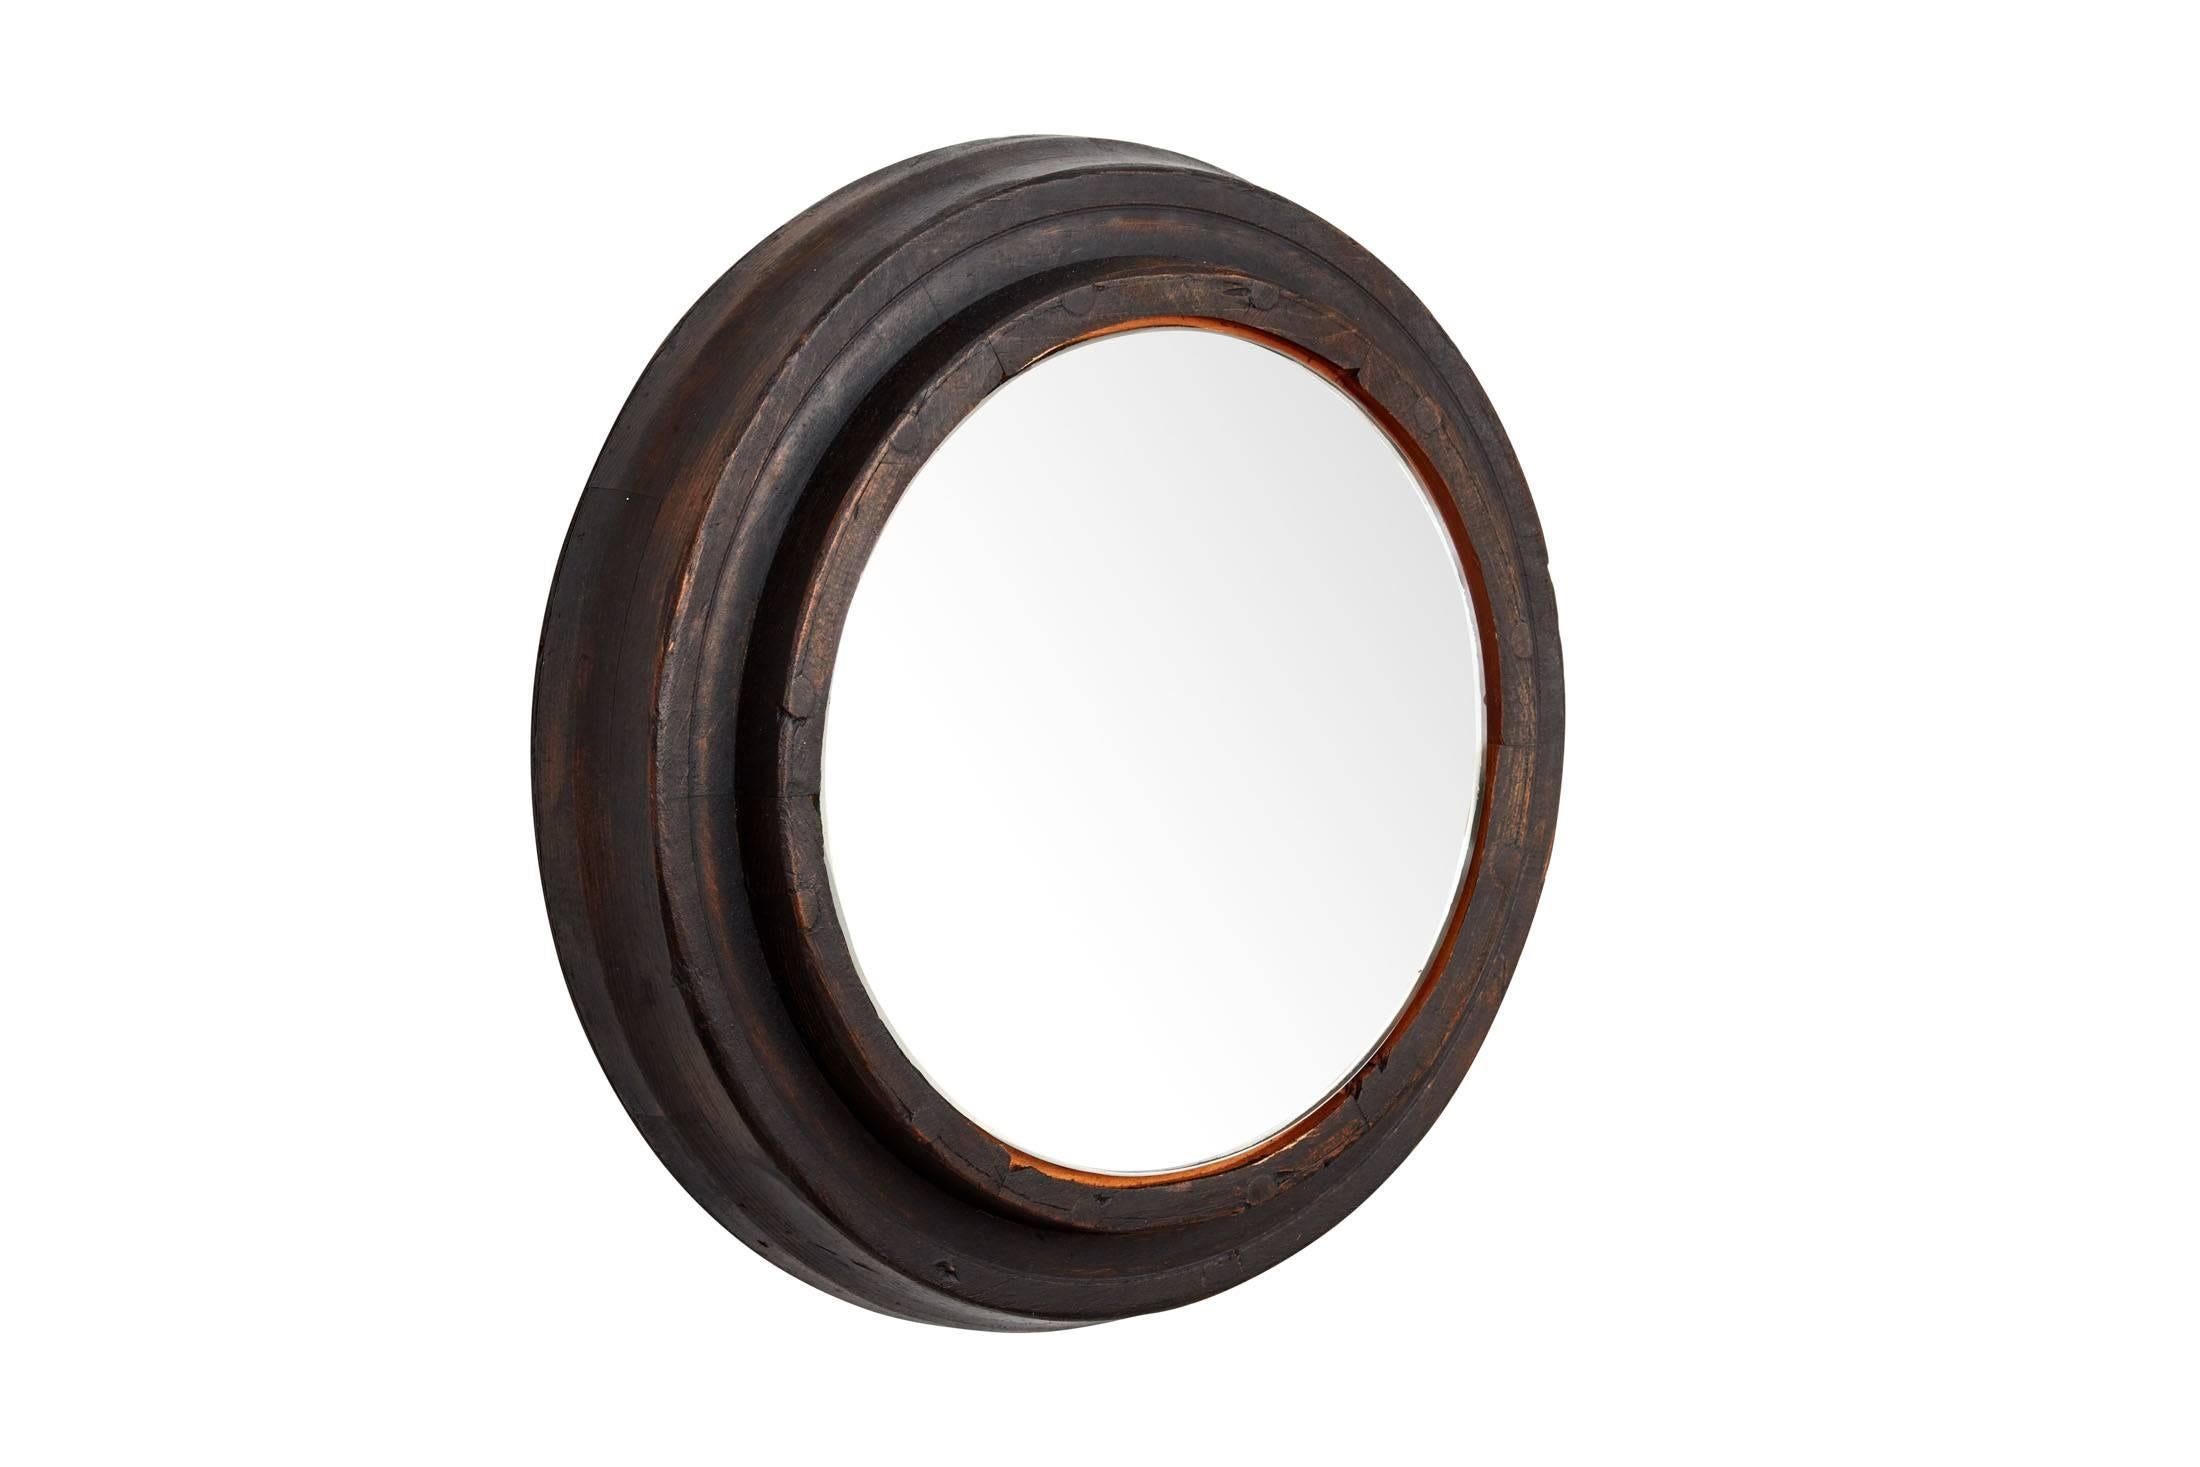 Early 20th century black wooden foundry gear frame (mirrored)
Nice graphic object


Dimensions: Piece is 17 inch diameter and 3.5 inchdeep with actual mirror 11.5 inch in diameter.